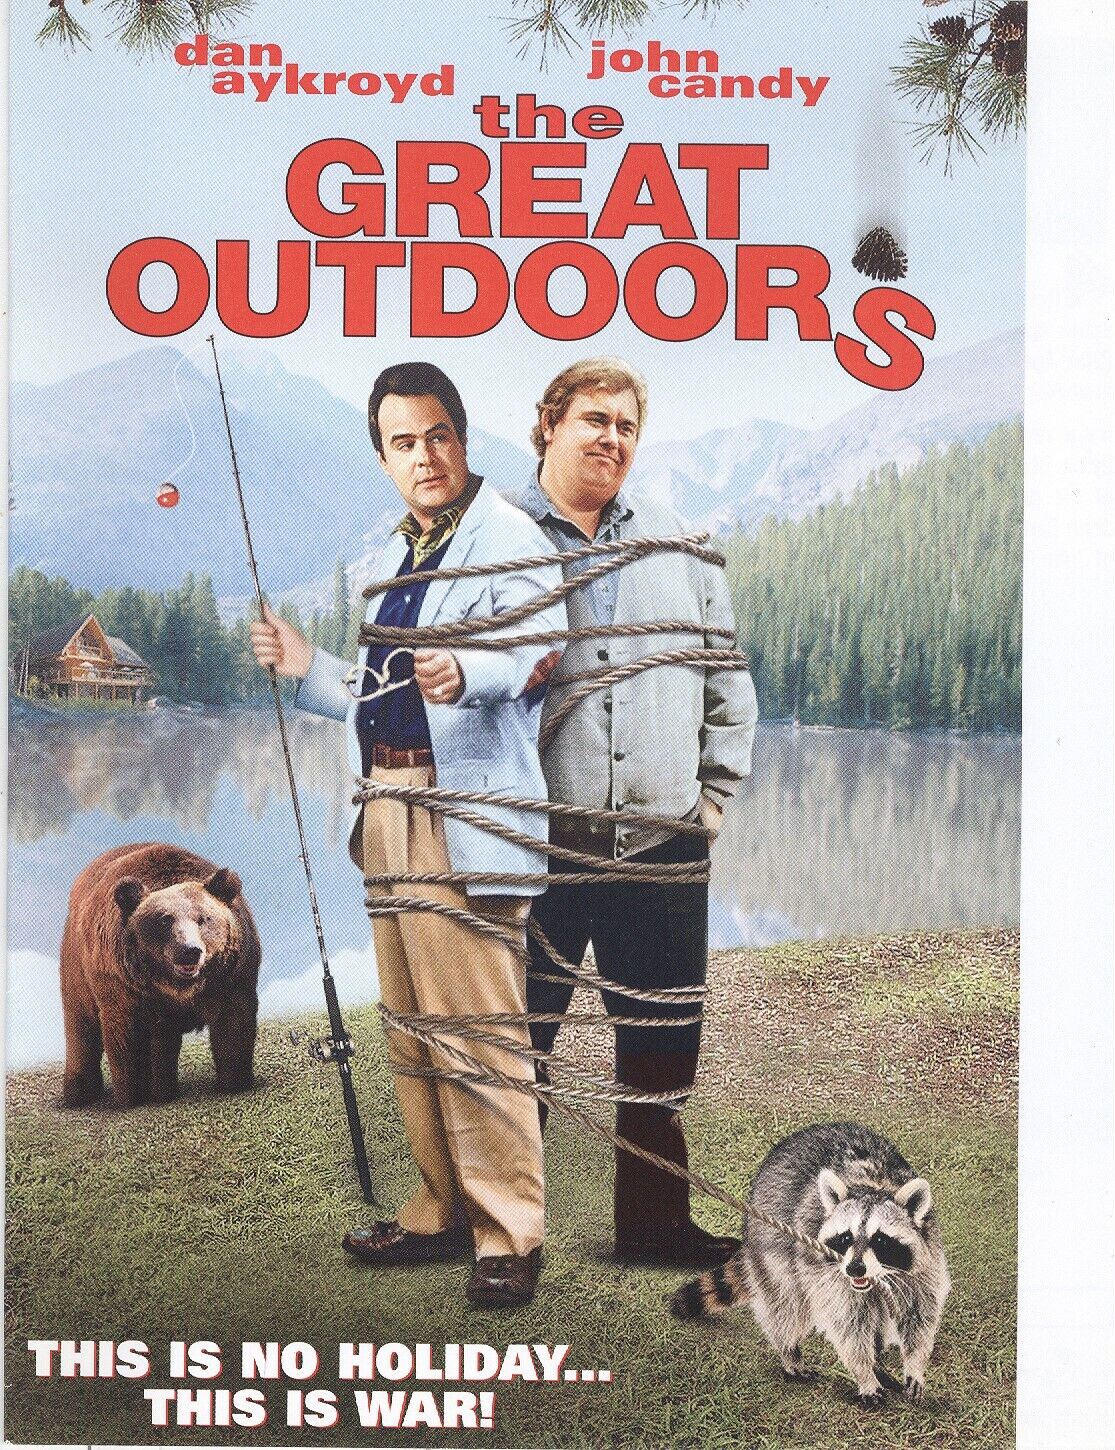 Replacement Max 78% OFF Minneapolis Mall Cover Art For DVD Case FRE The Great Outdoors 1988